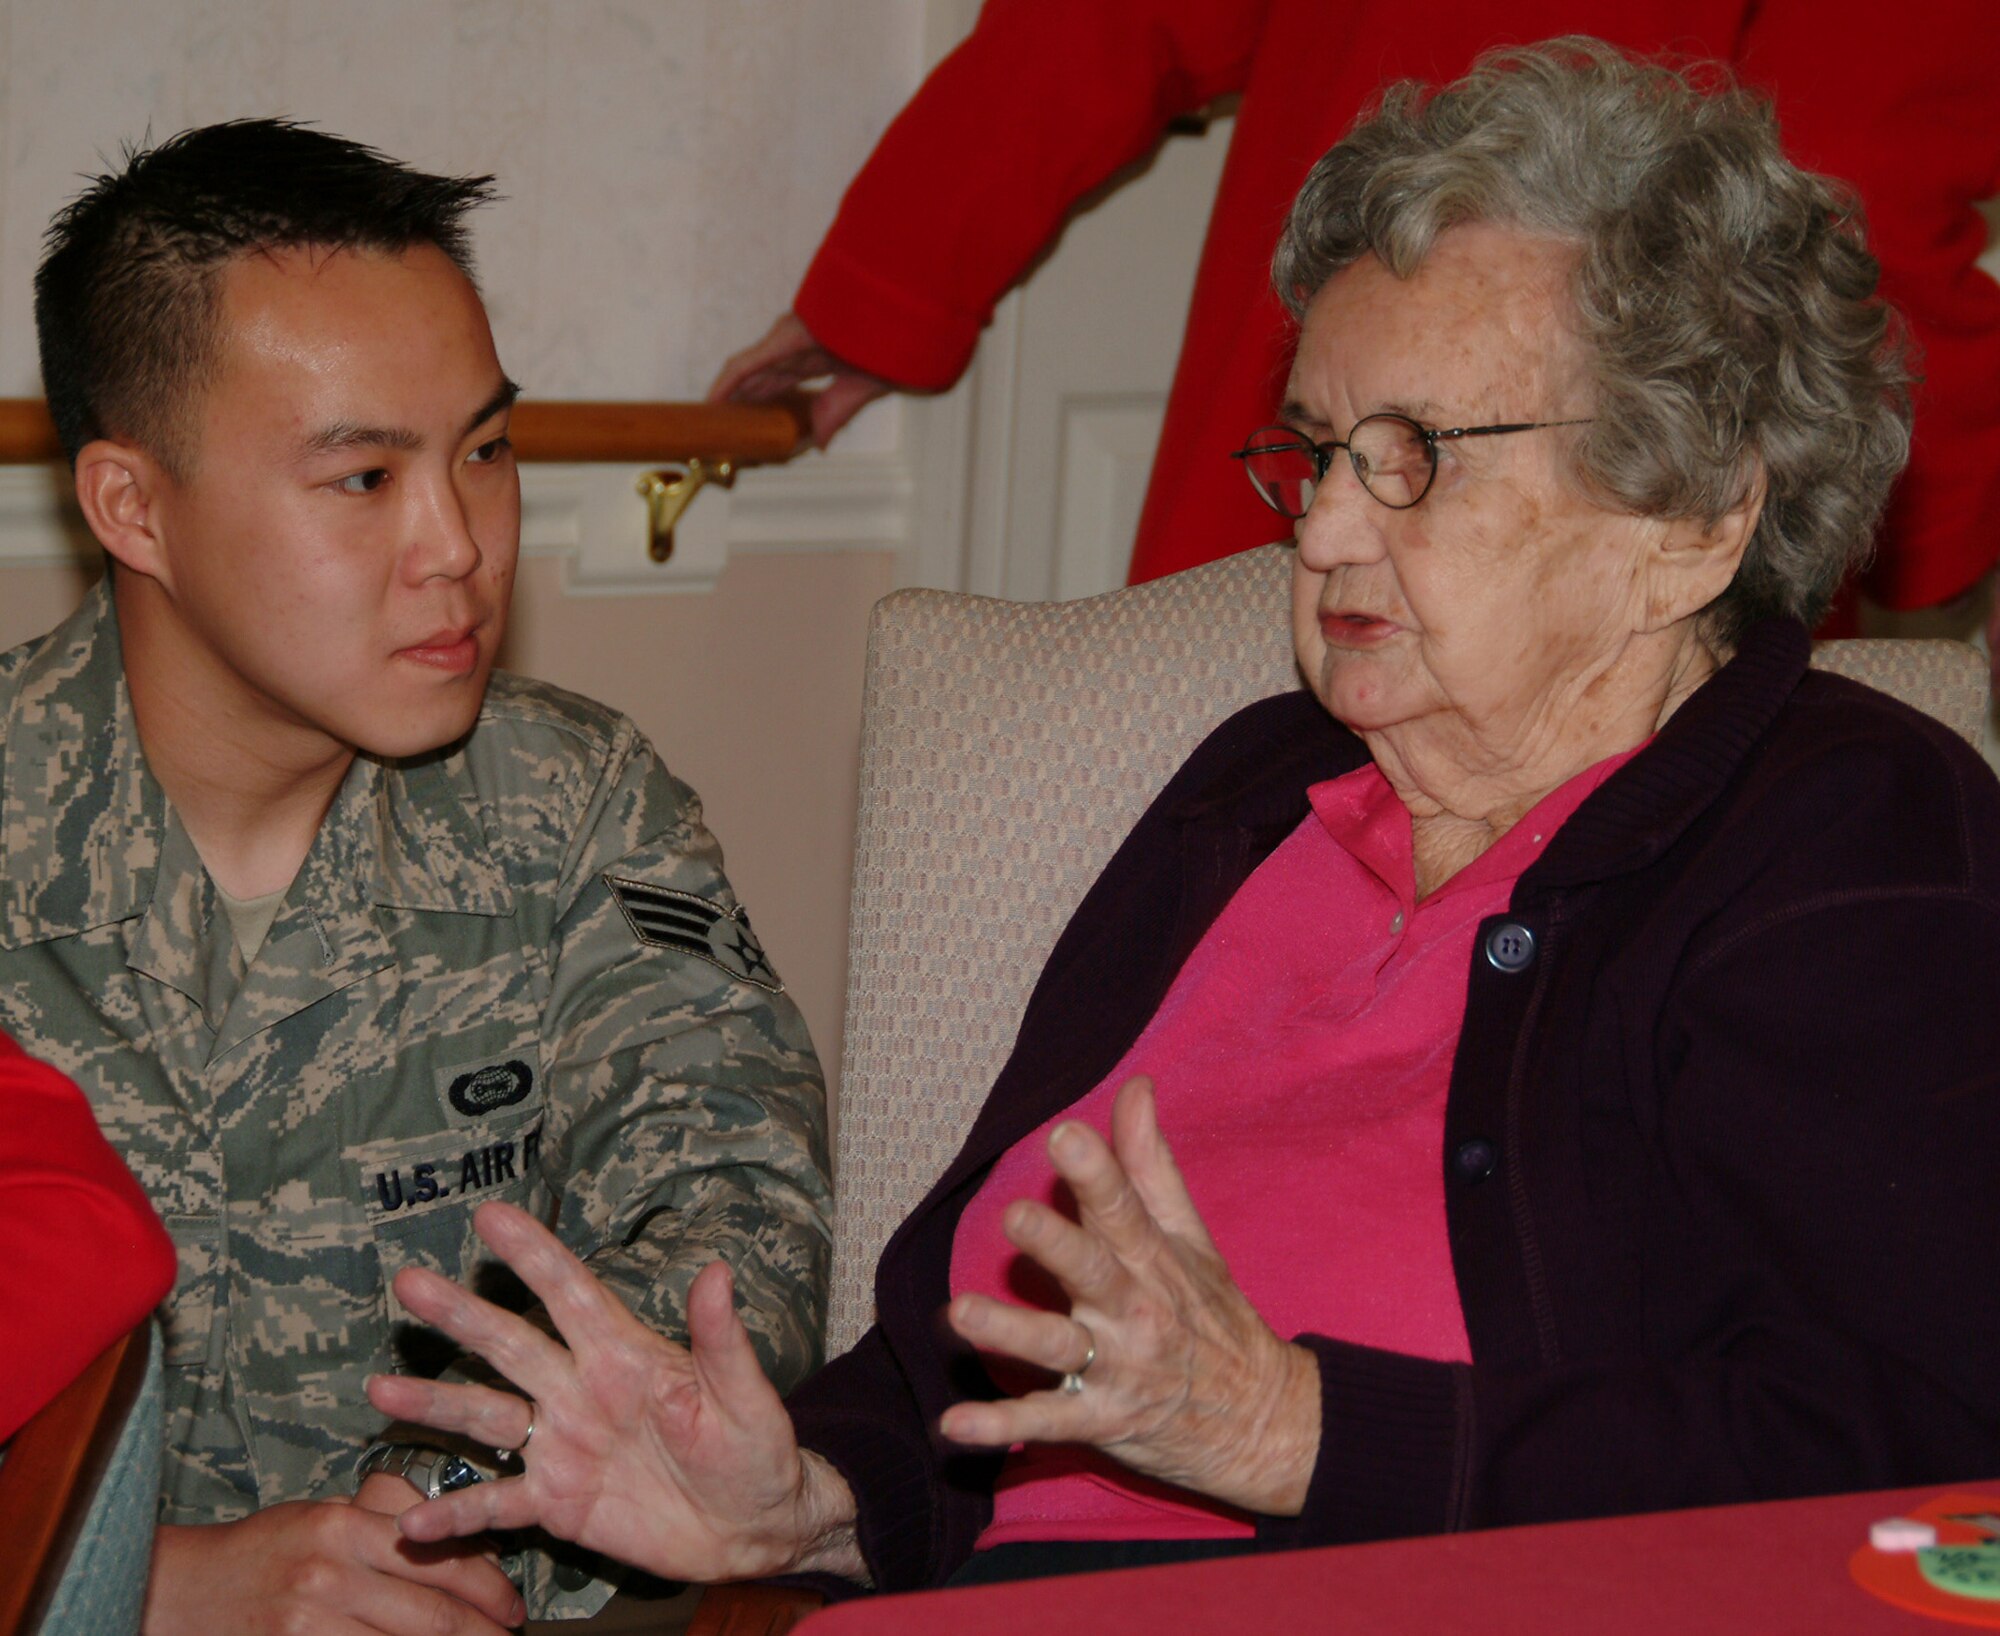 Senior Airman Steve Lee, 68th Electronic Warfare Squadron, talks with Juanita Feb. 14 at the Sterling House in Niceville Fla.  More than 50 active duty 53d Wing members presented vets in nursing homes around the local area with cards and candy on Valentine's Day.  U.S. Air Force photo by Master Sgt. Andrew Leonhard.  